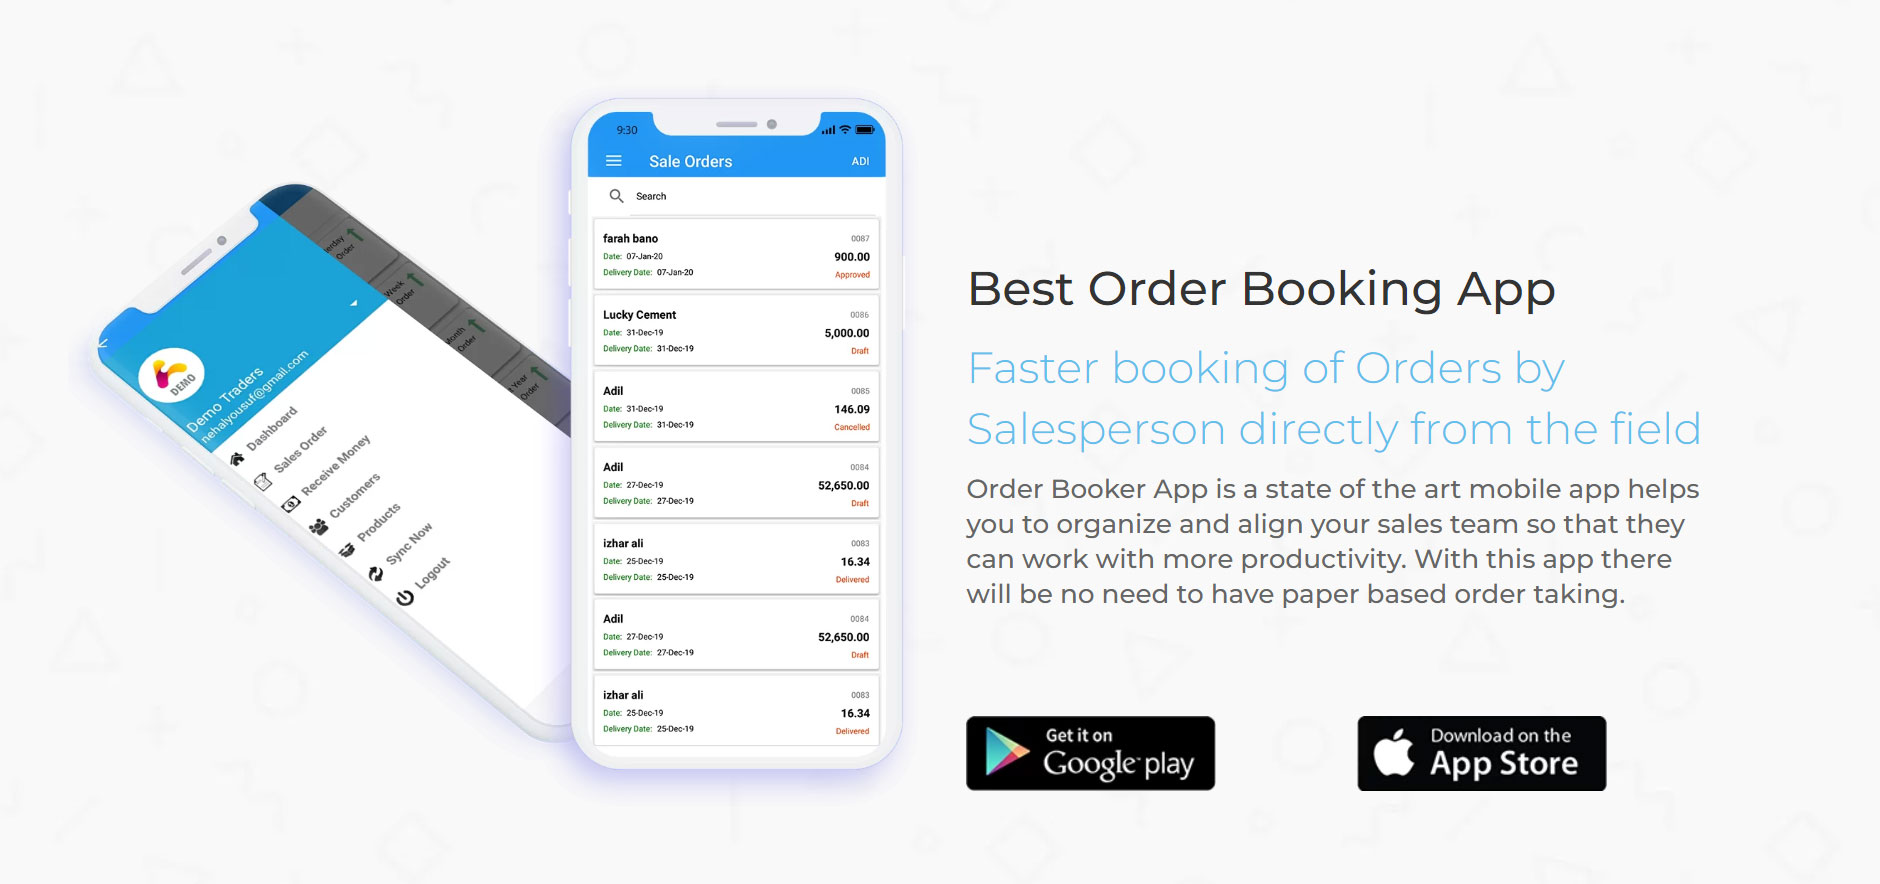 order-booker-app-and-come-content